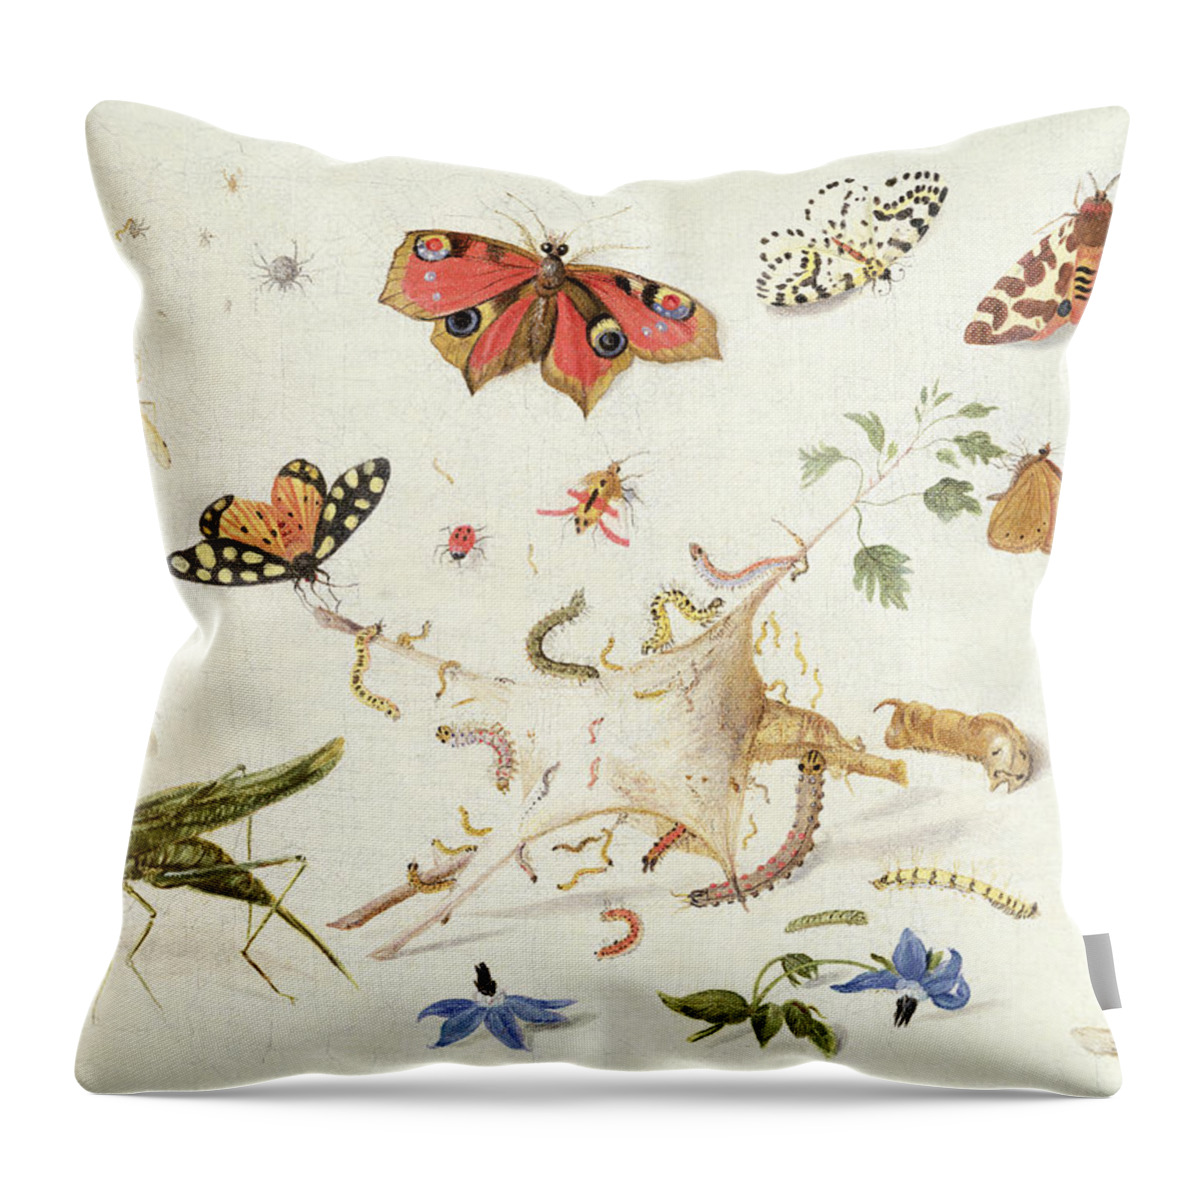 Insect Throw Pillow featuring the painting Study of Insects and Flowers by Ferdinand van Kessel